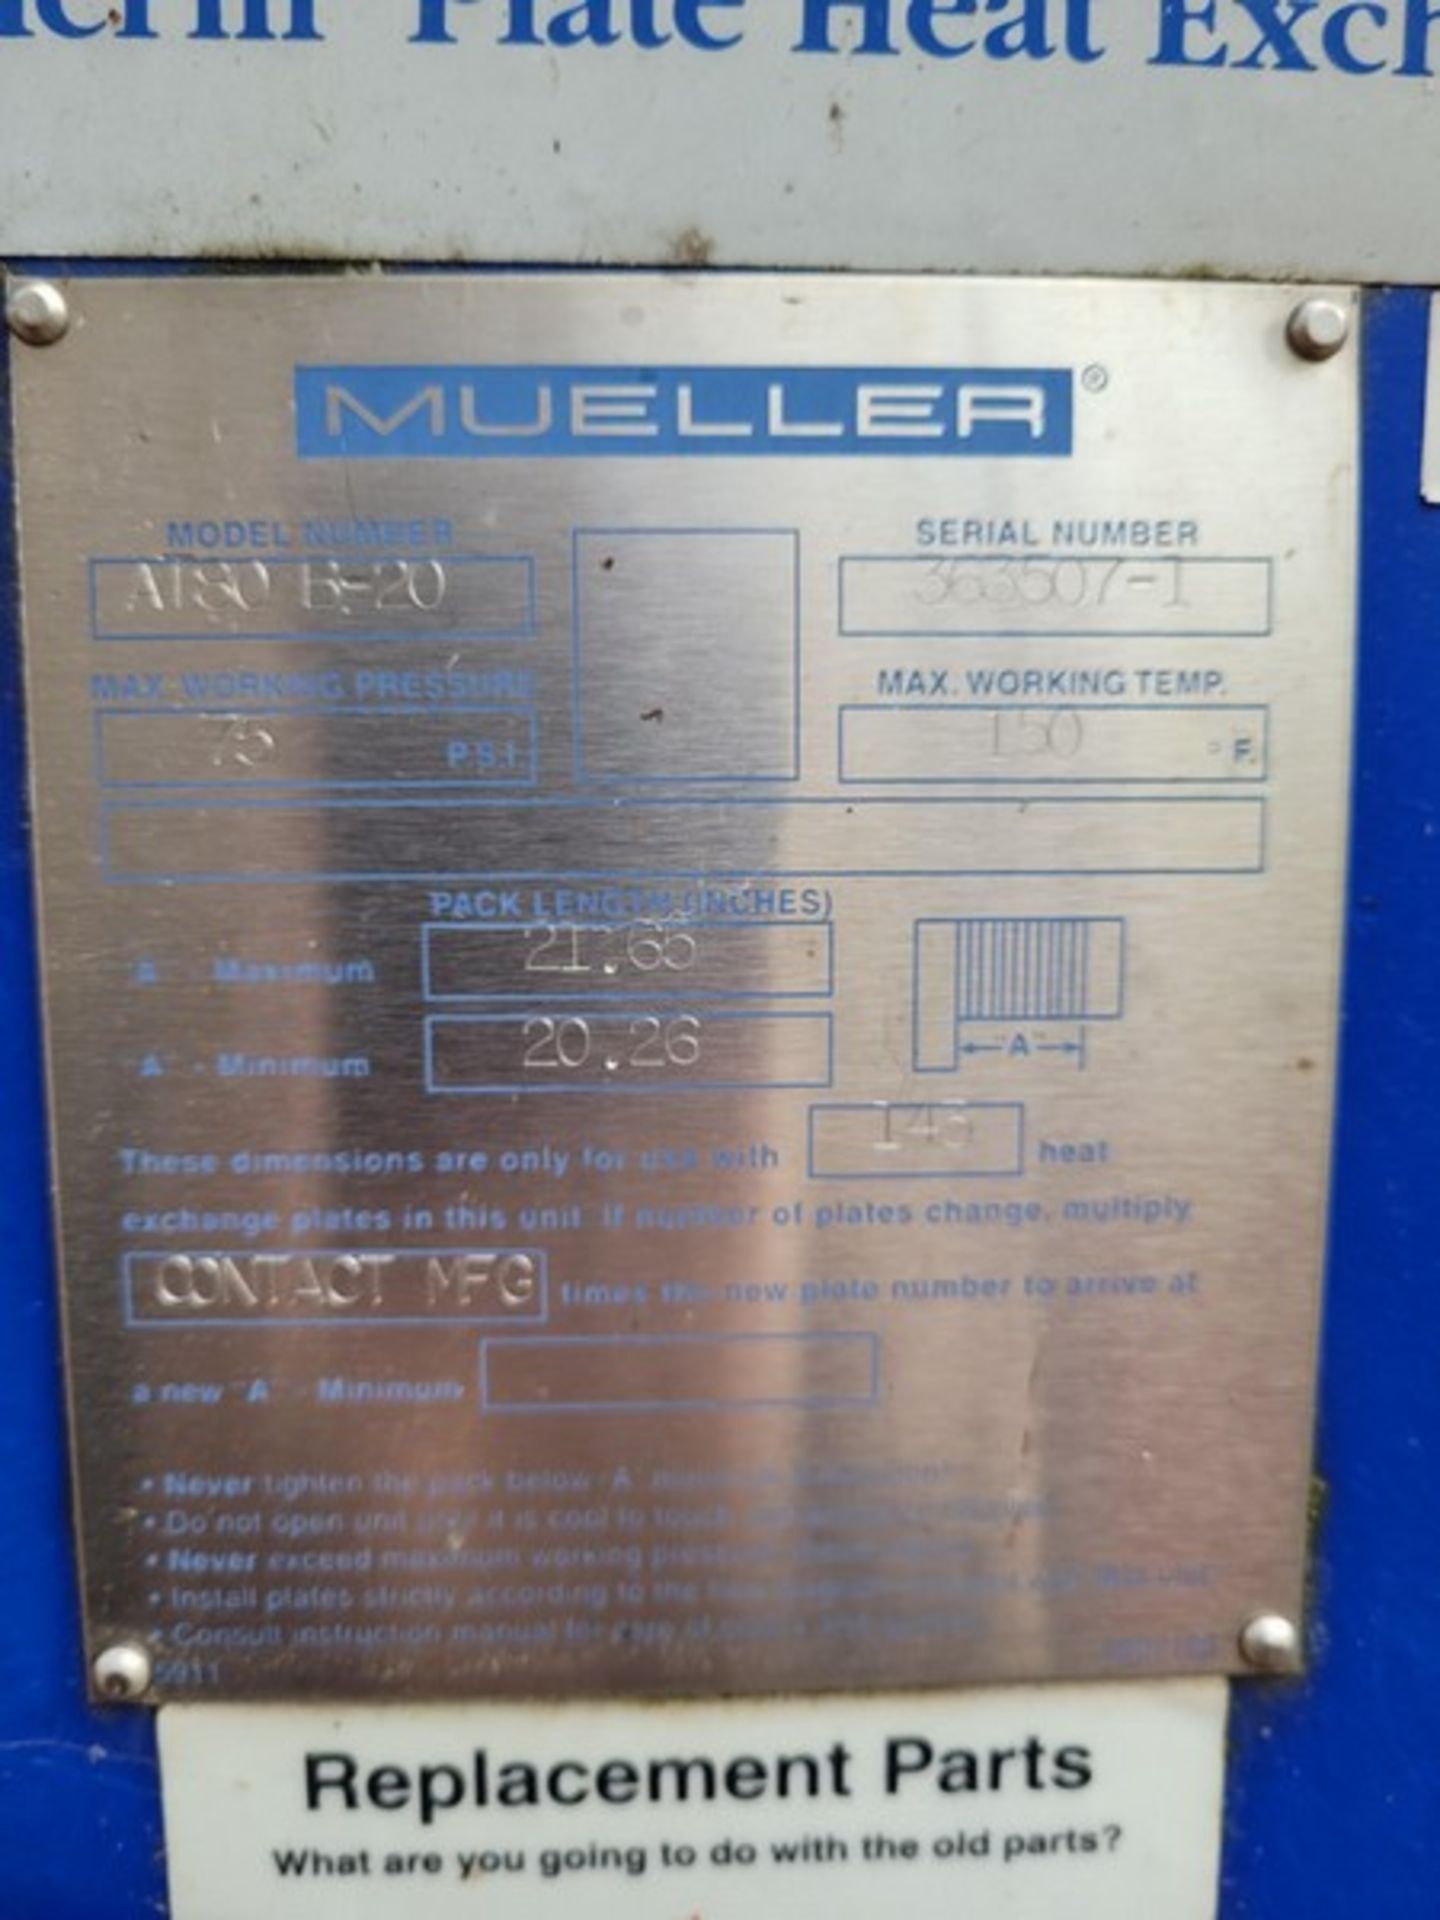 Mueller Plate Heat Exchanger, Model AT80 B20, S/N 363507-1 (Loading Fee $475) (Located Cabot, VT - Image 3 of 3